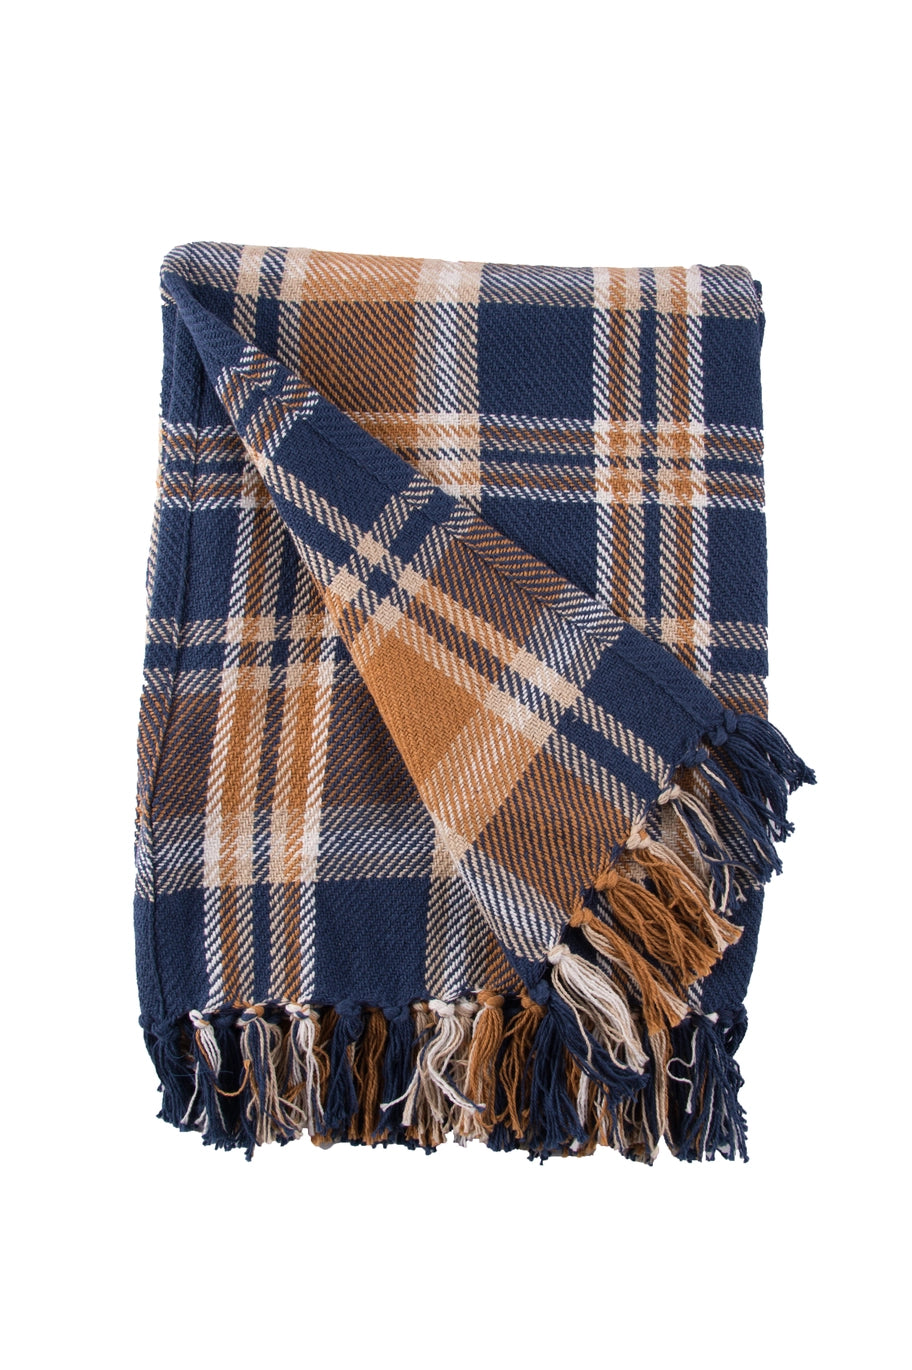 Navy and Gold Plaid Throw Blanket